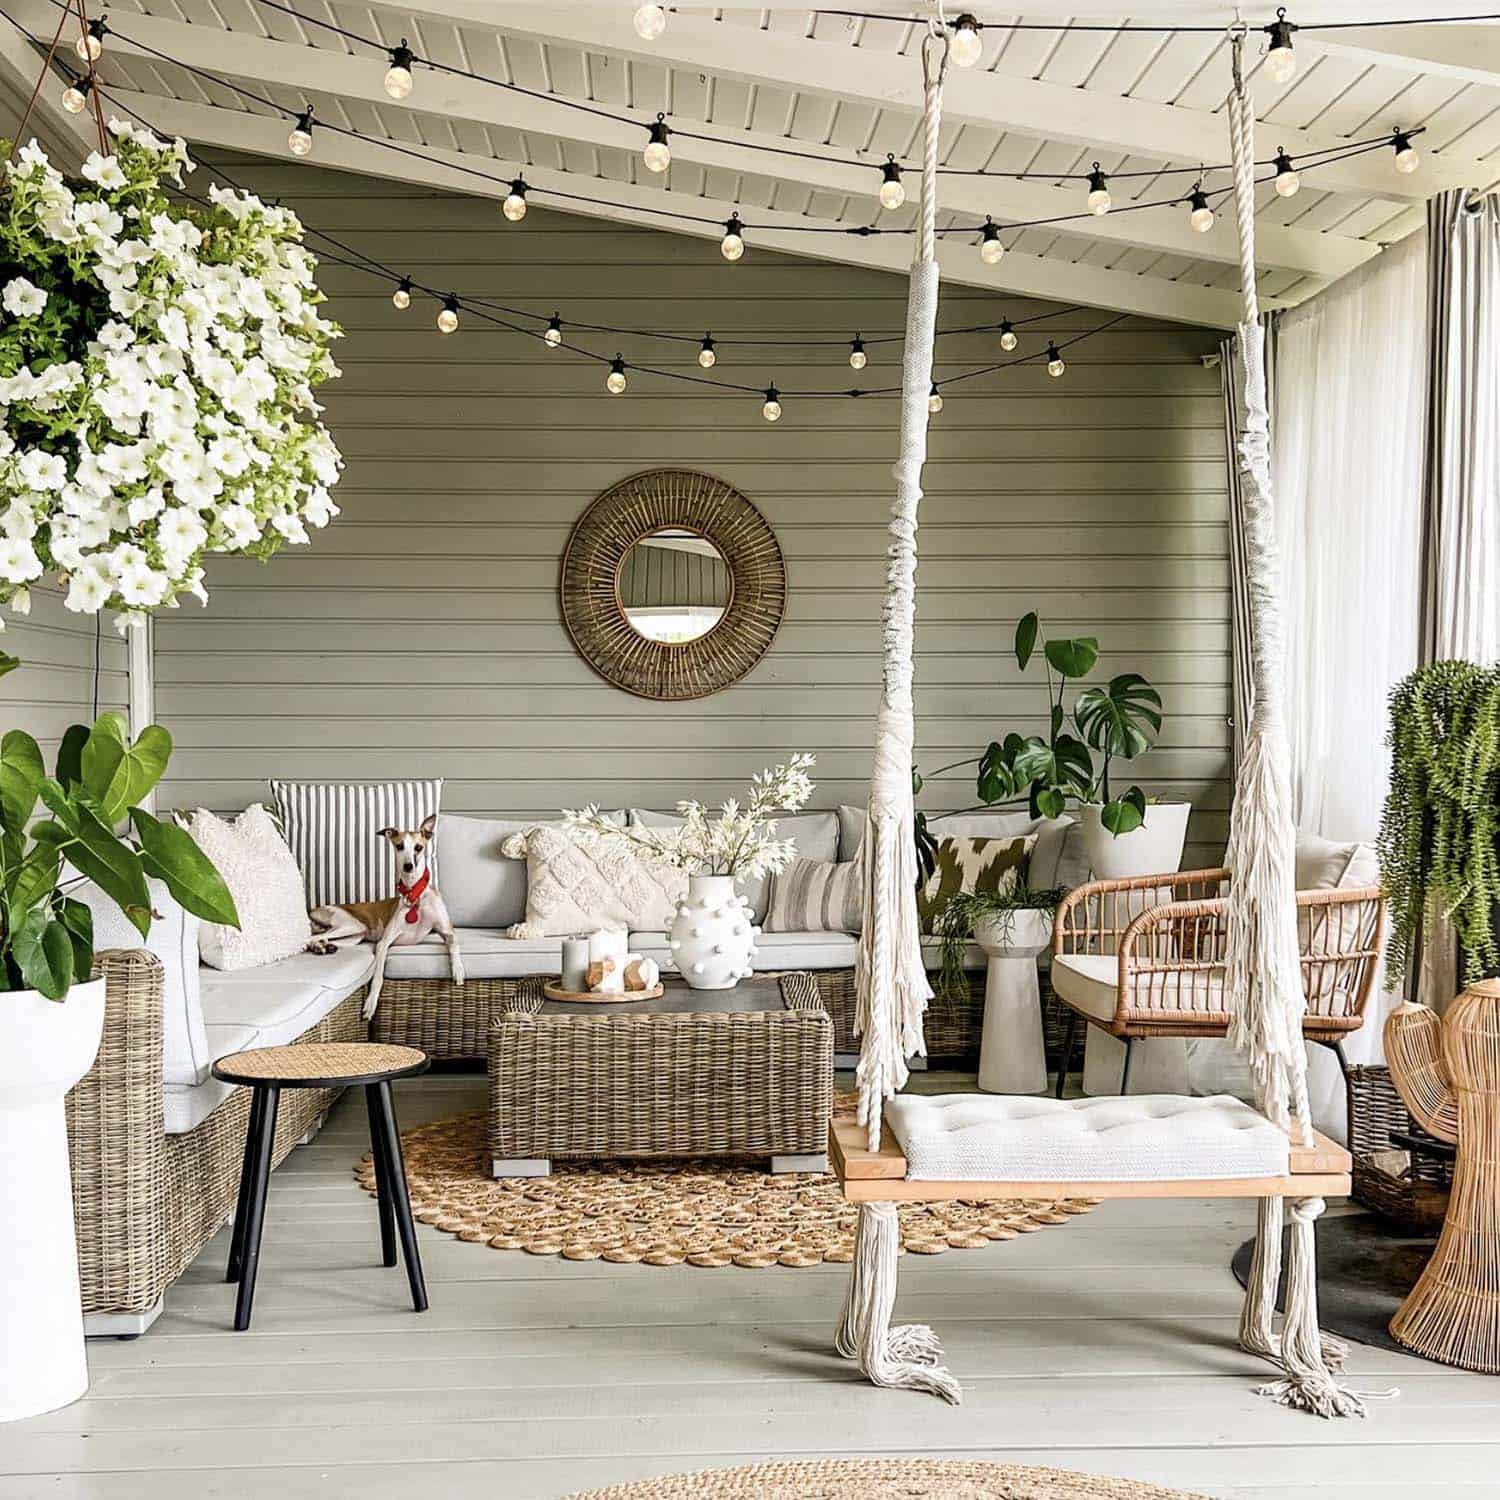 cozy covered patio with a wicker sectional and hanging swing